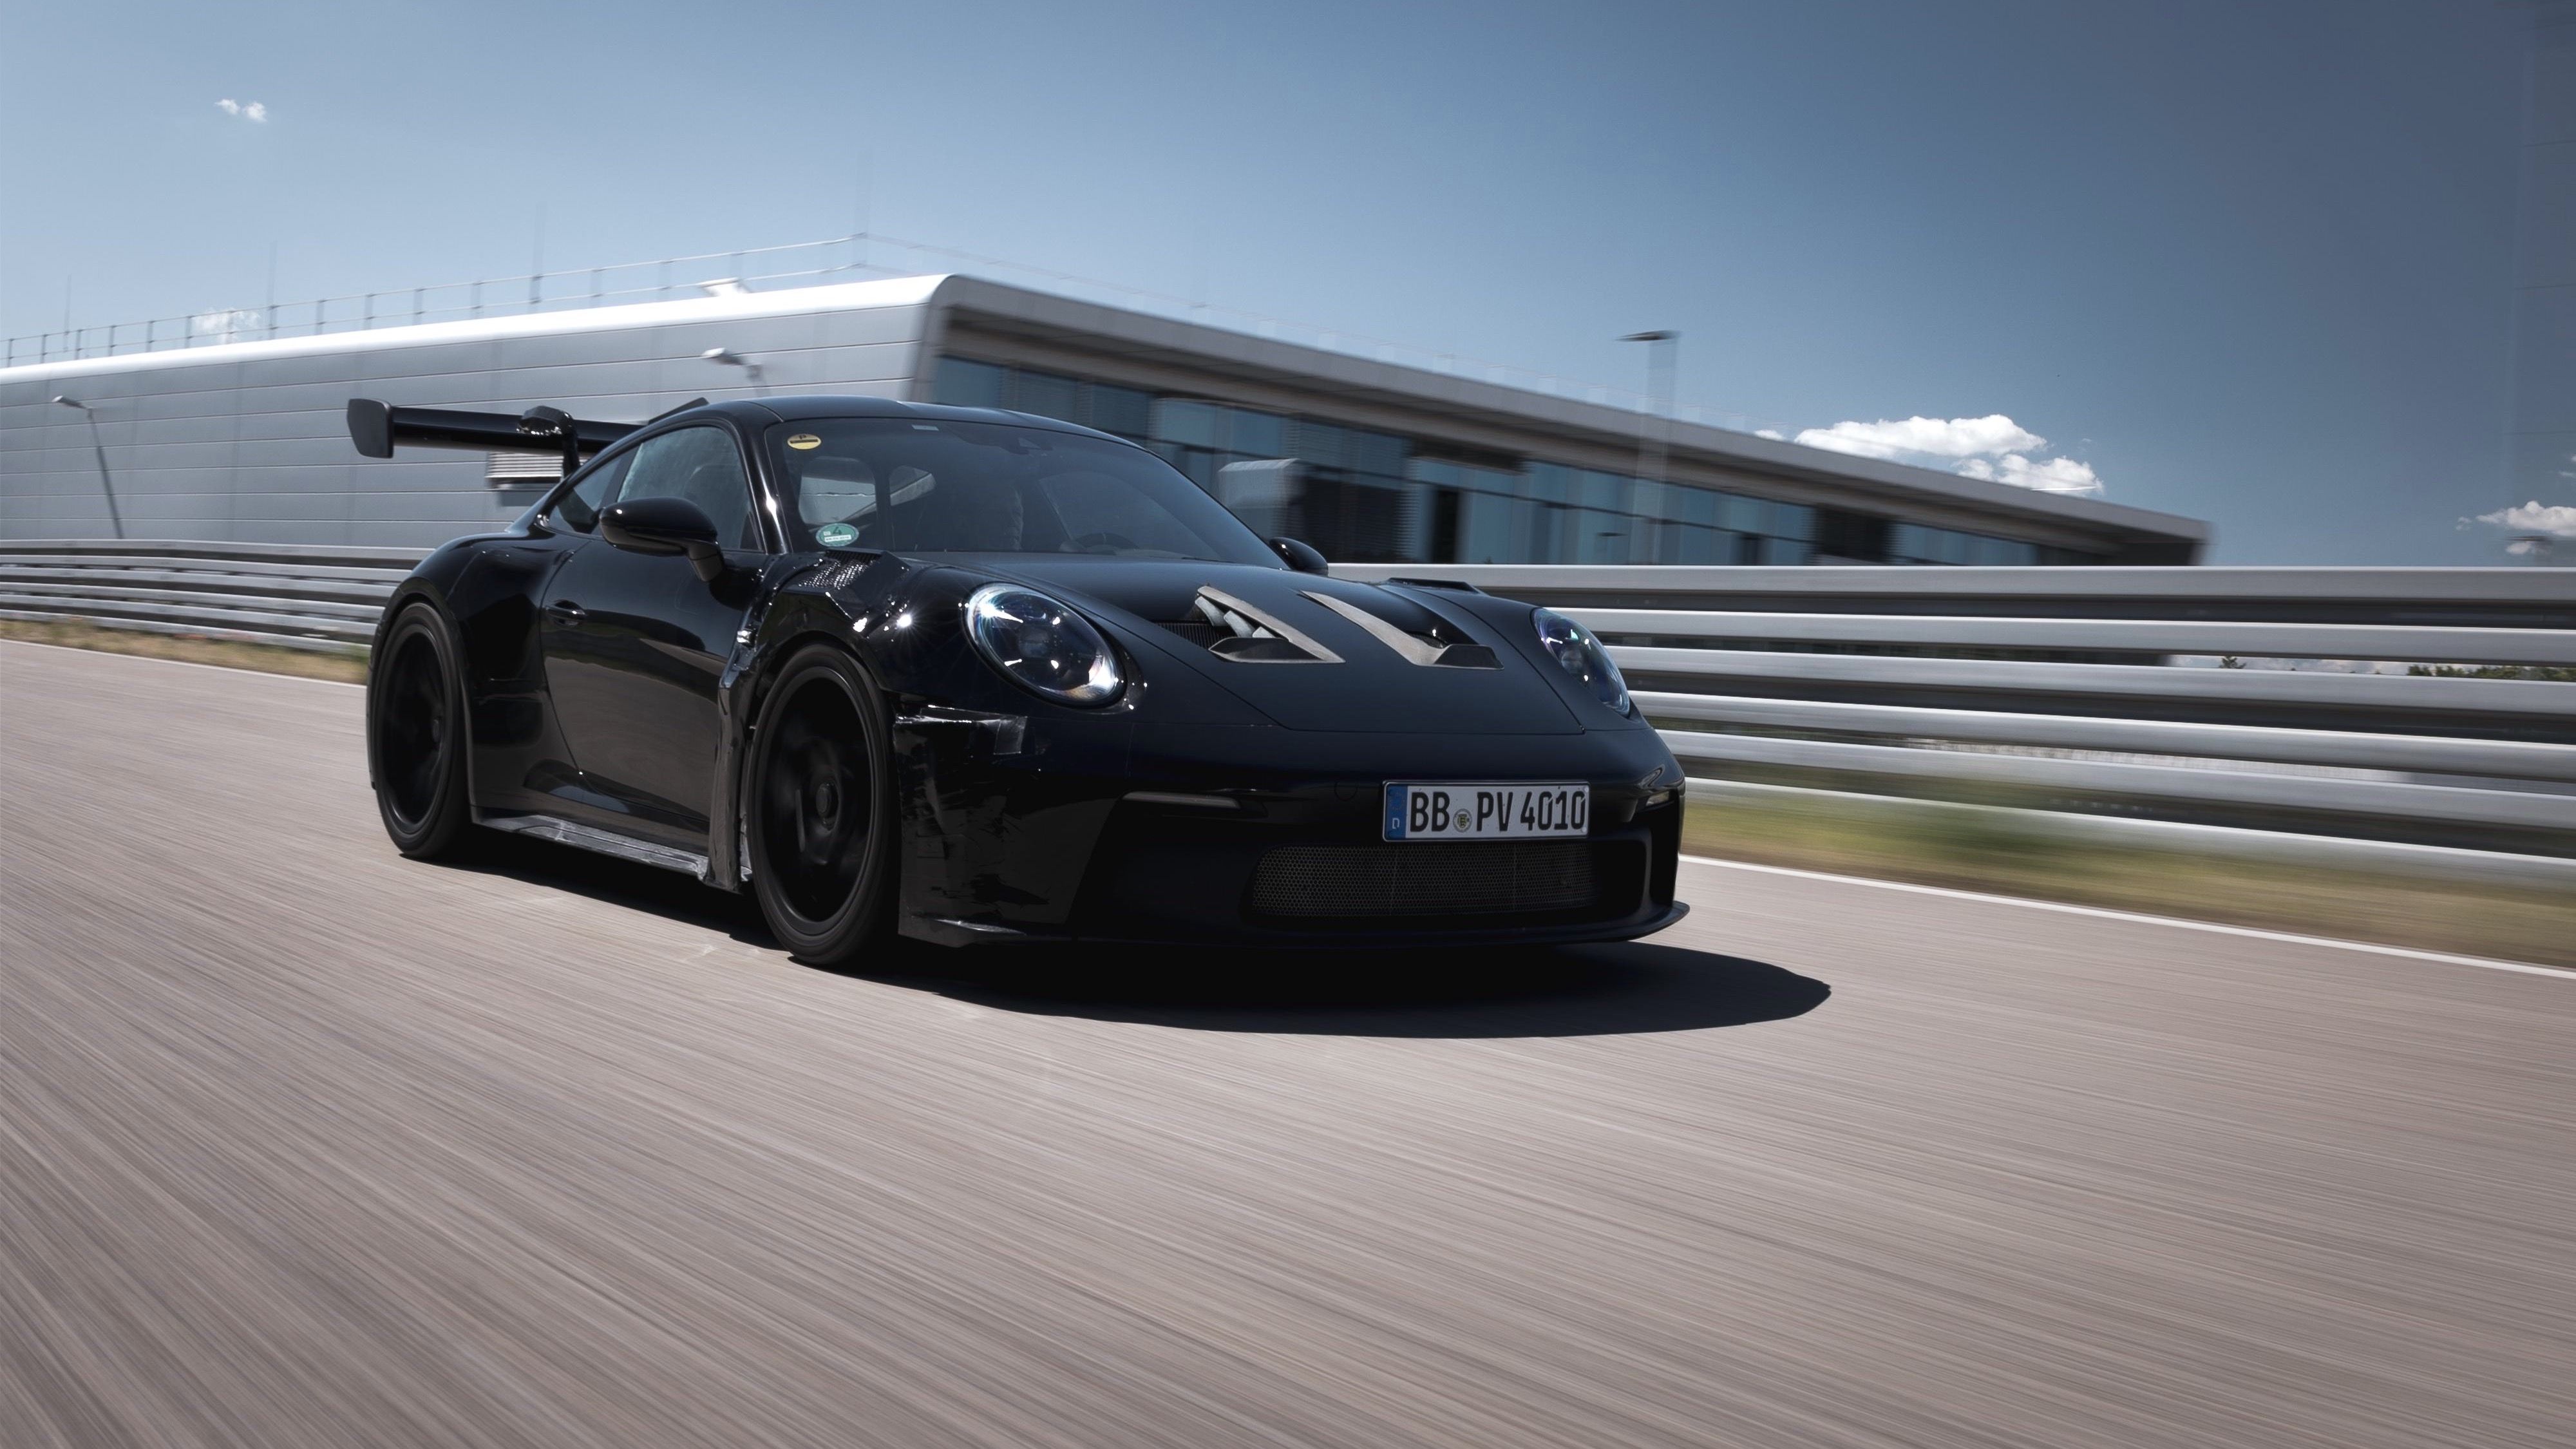 23 Porsche 911 Gt3 Rs Teased Ahead Of August 17 Debut